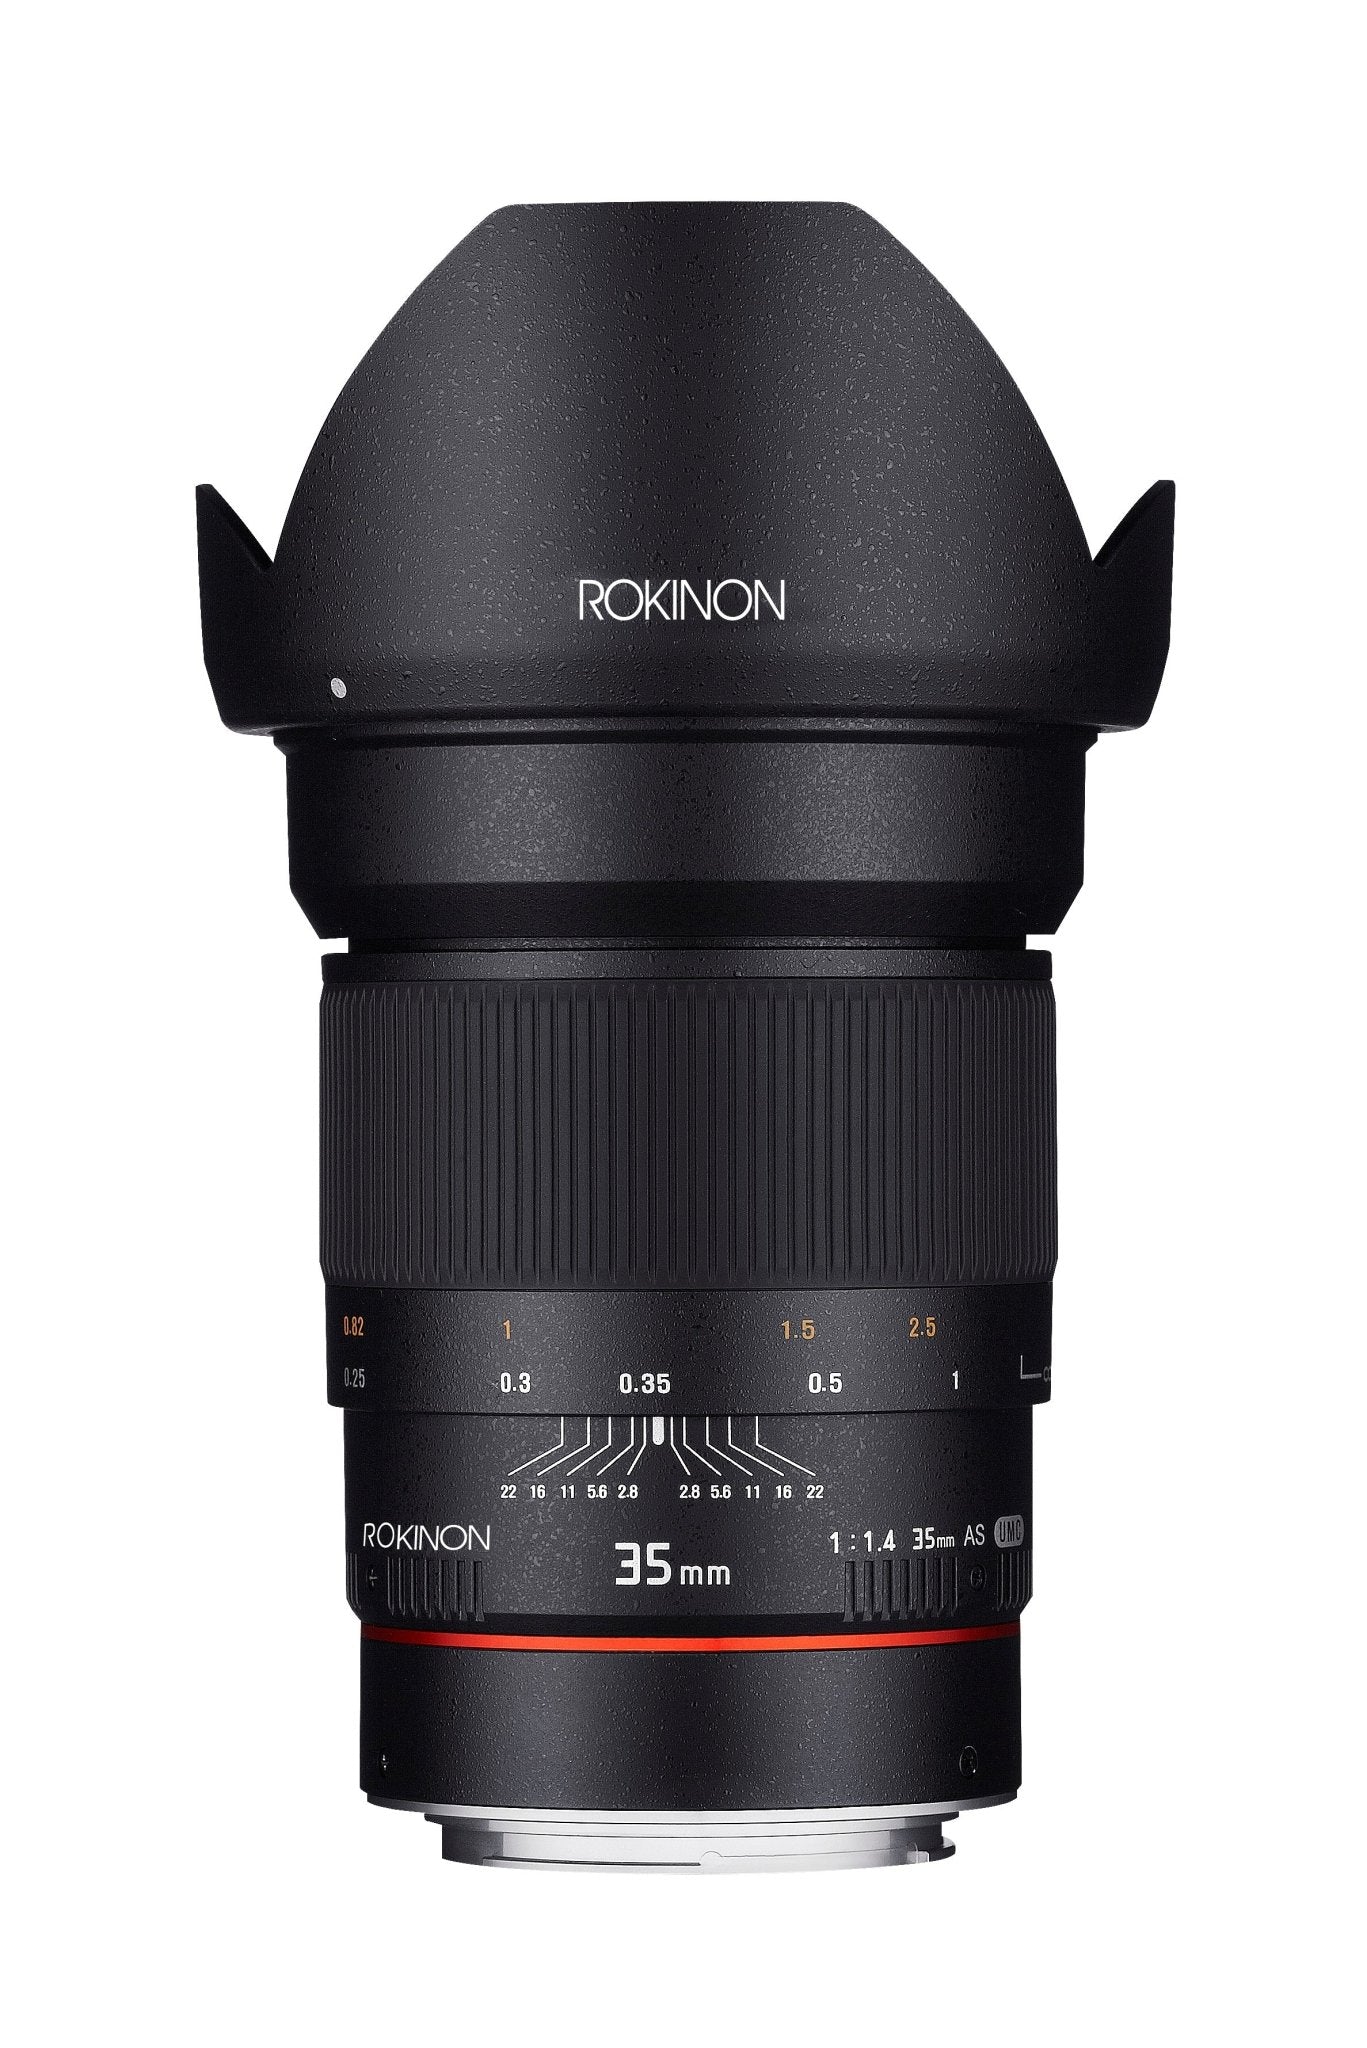 24mm F1.4 Full Frame Wide Angle – Rokinon